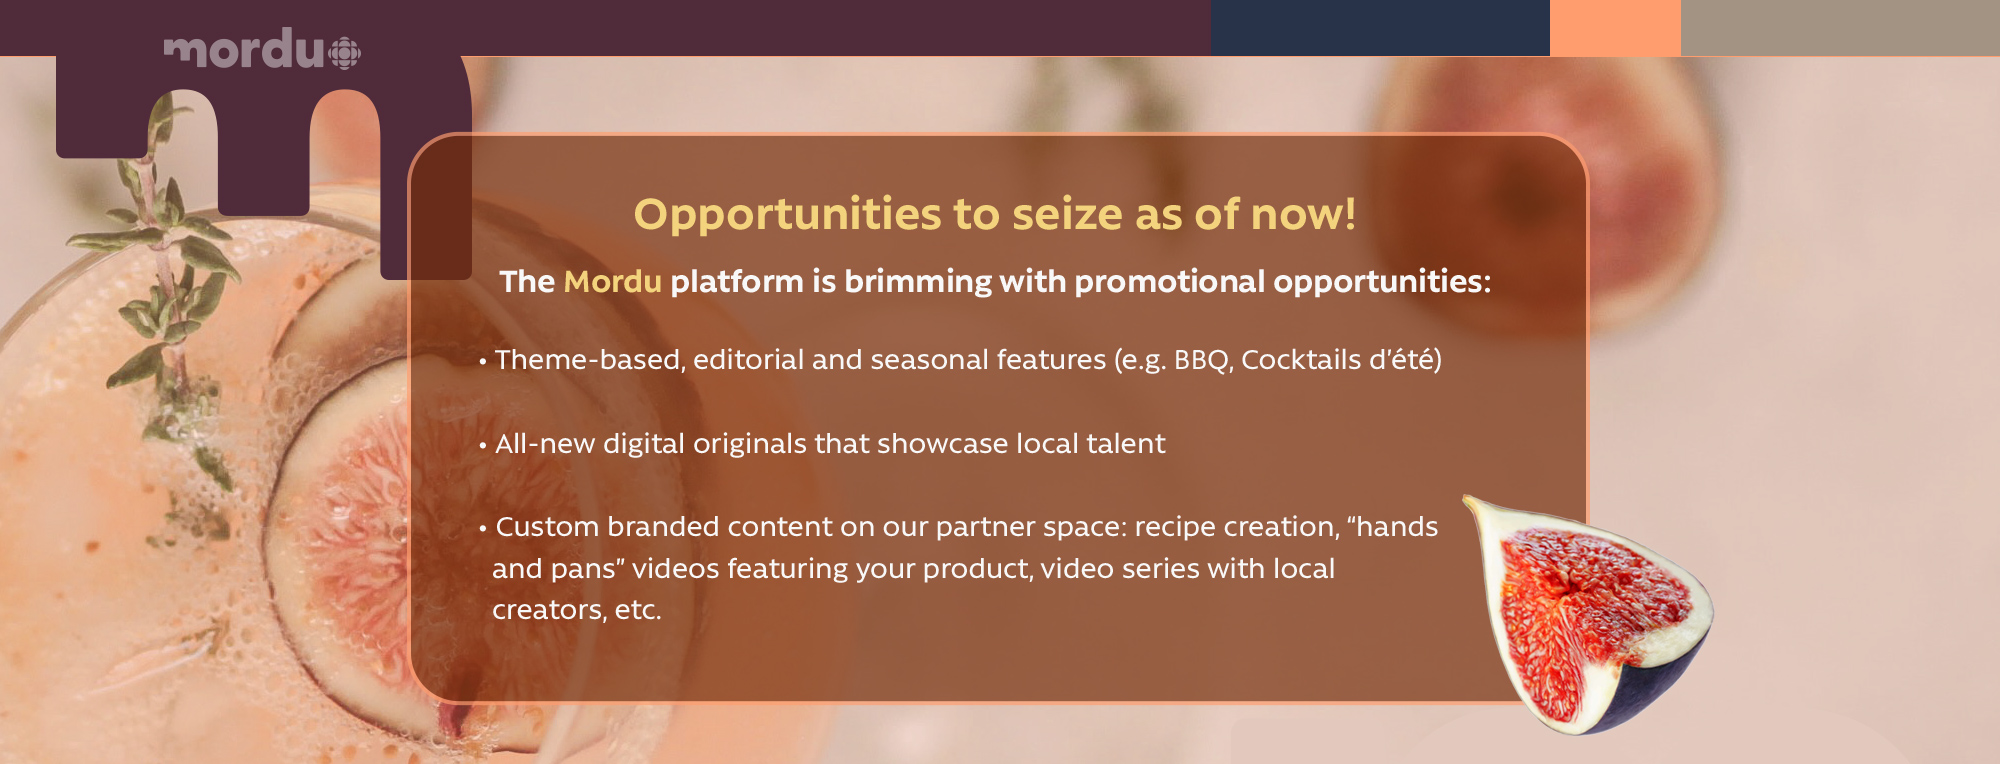 Opportunities to seize as of now! The Mordu platform is brimming with promotional opprtunities